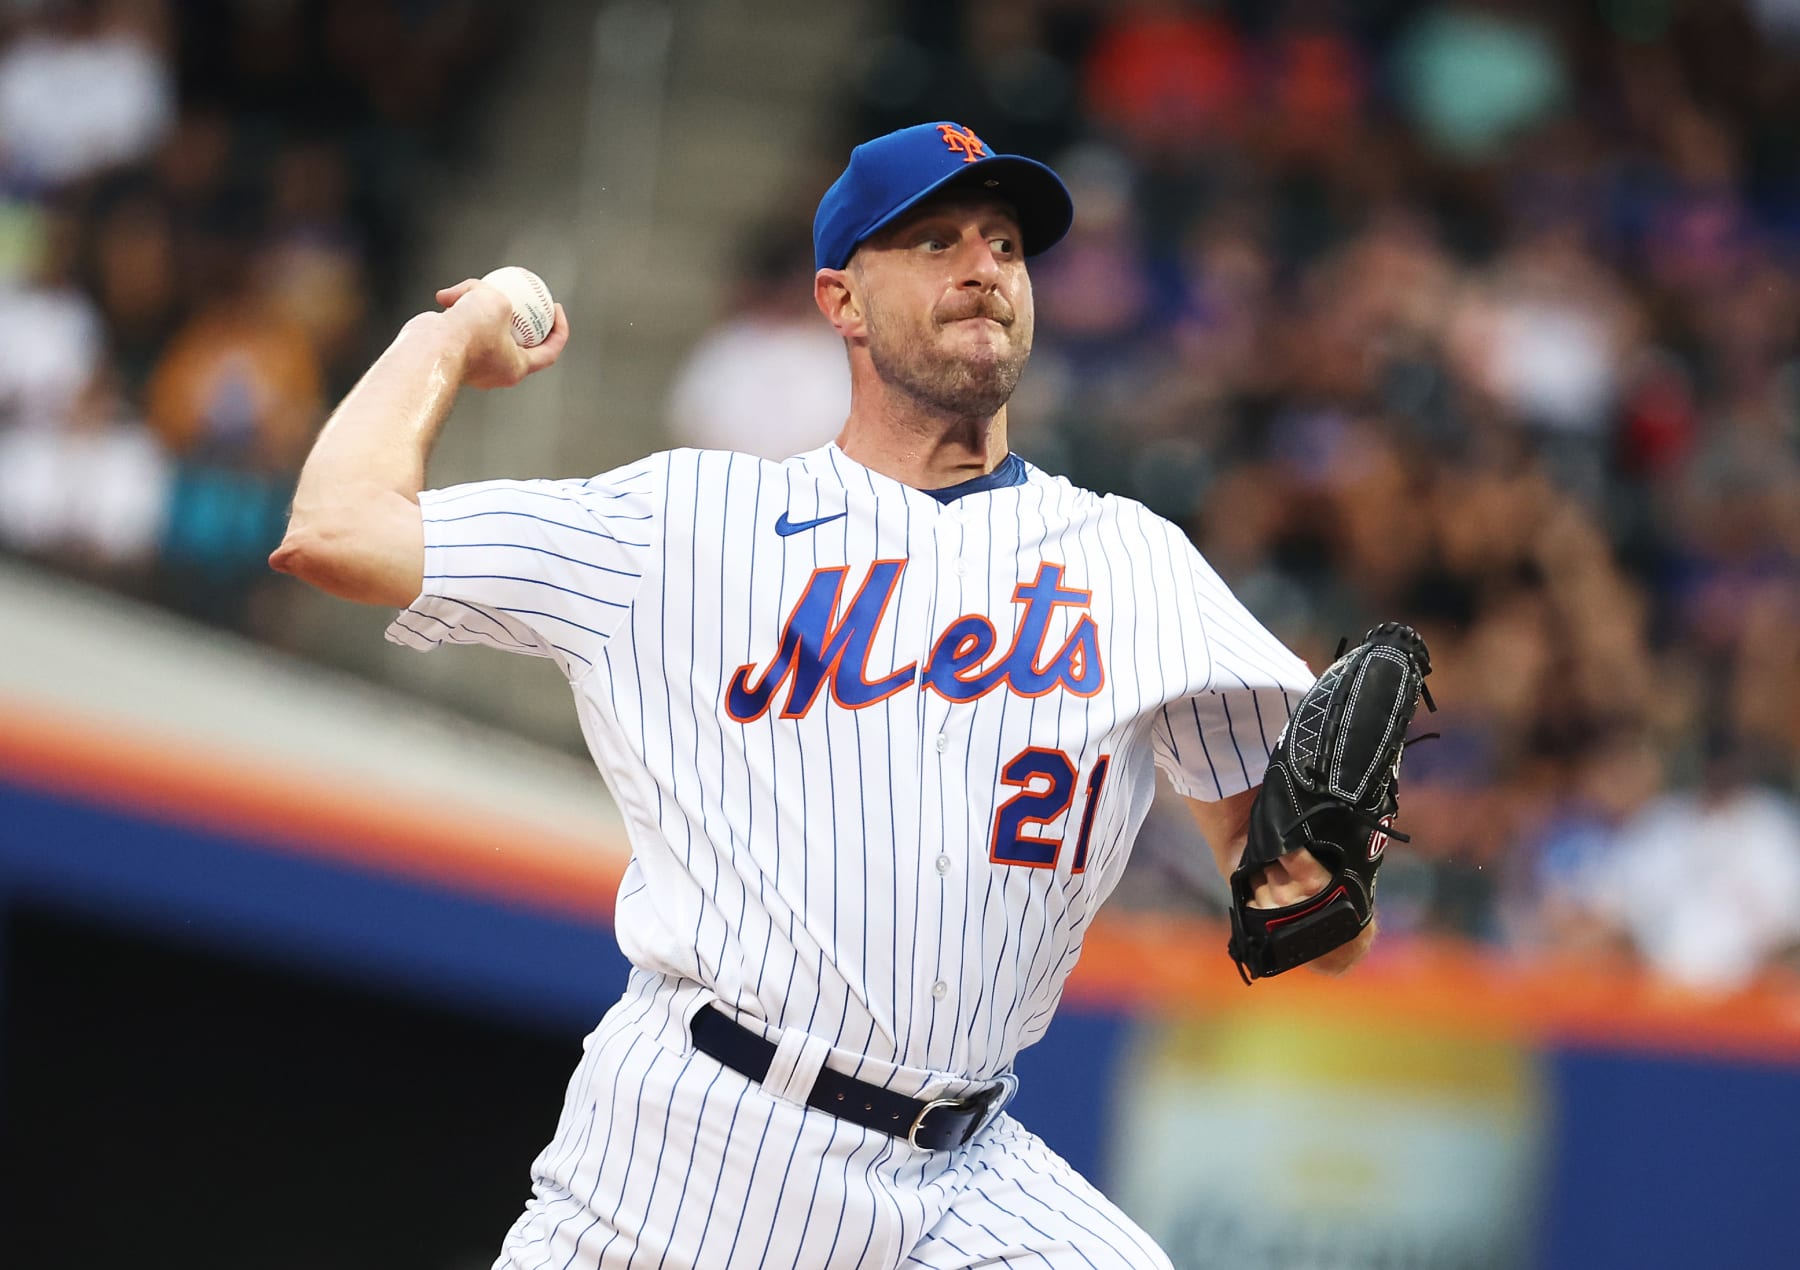 NY Mets: Max Scherzer ready for conversation with front office